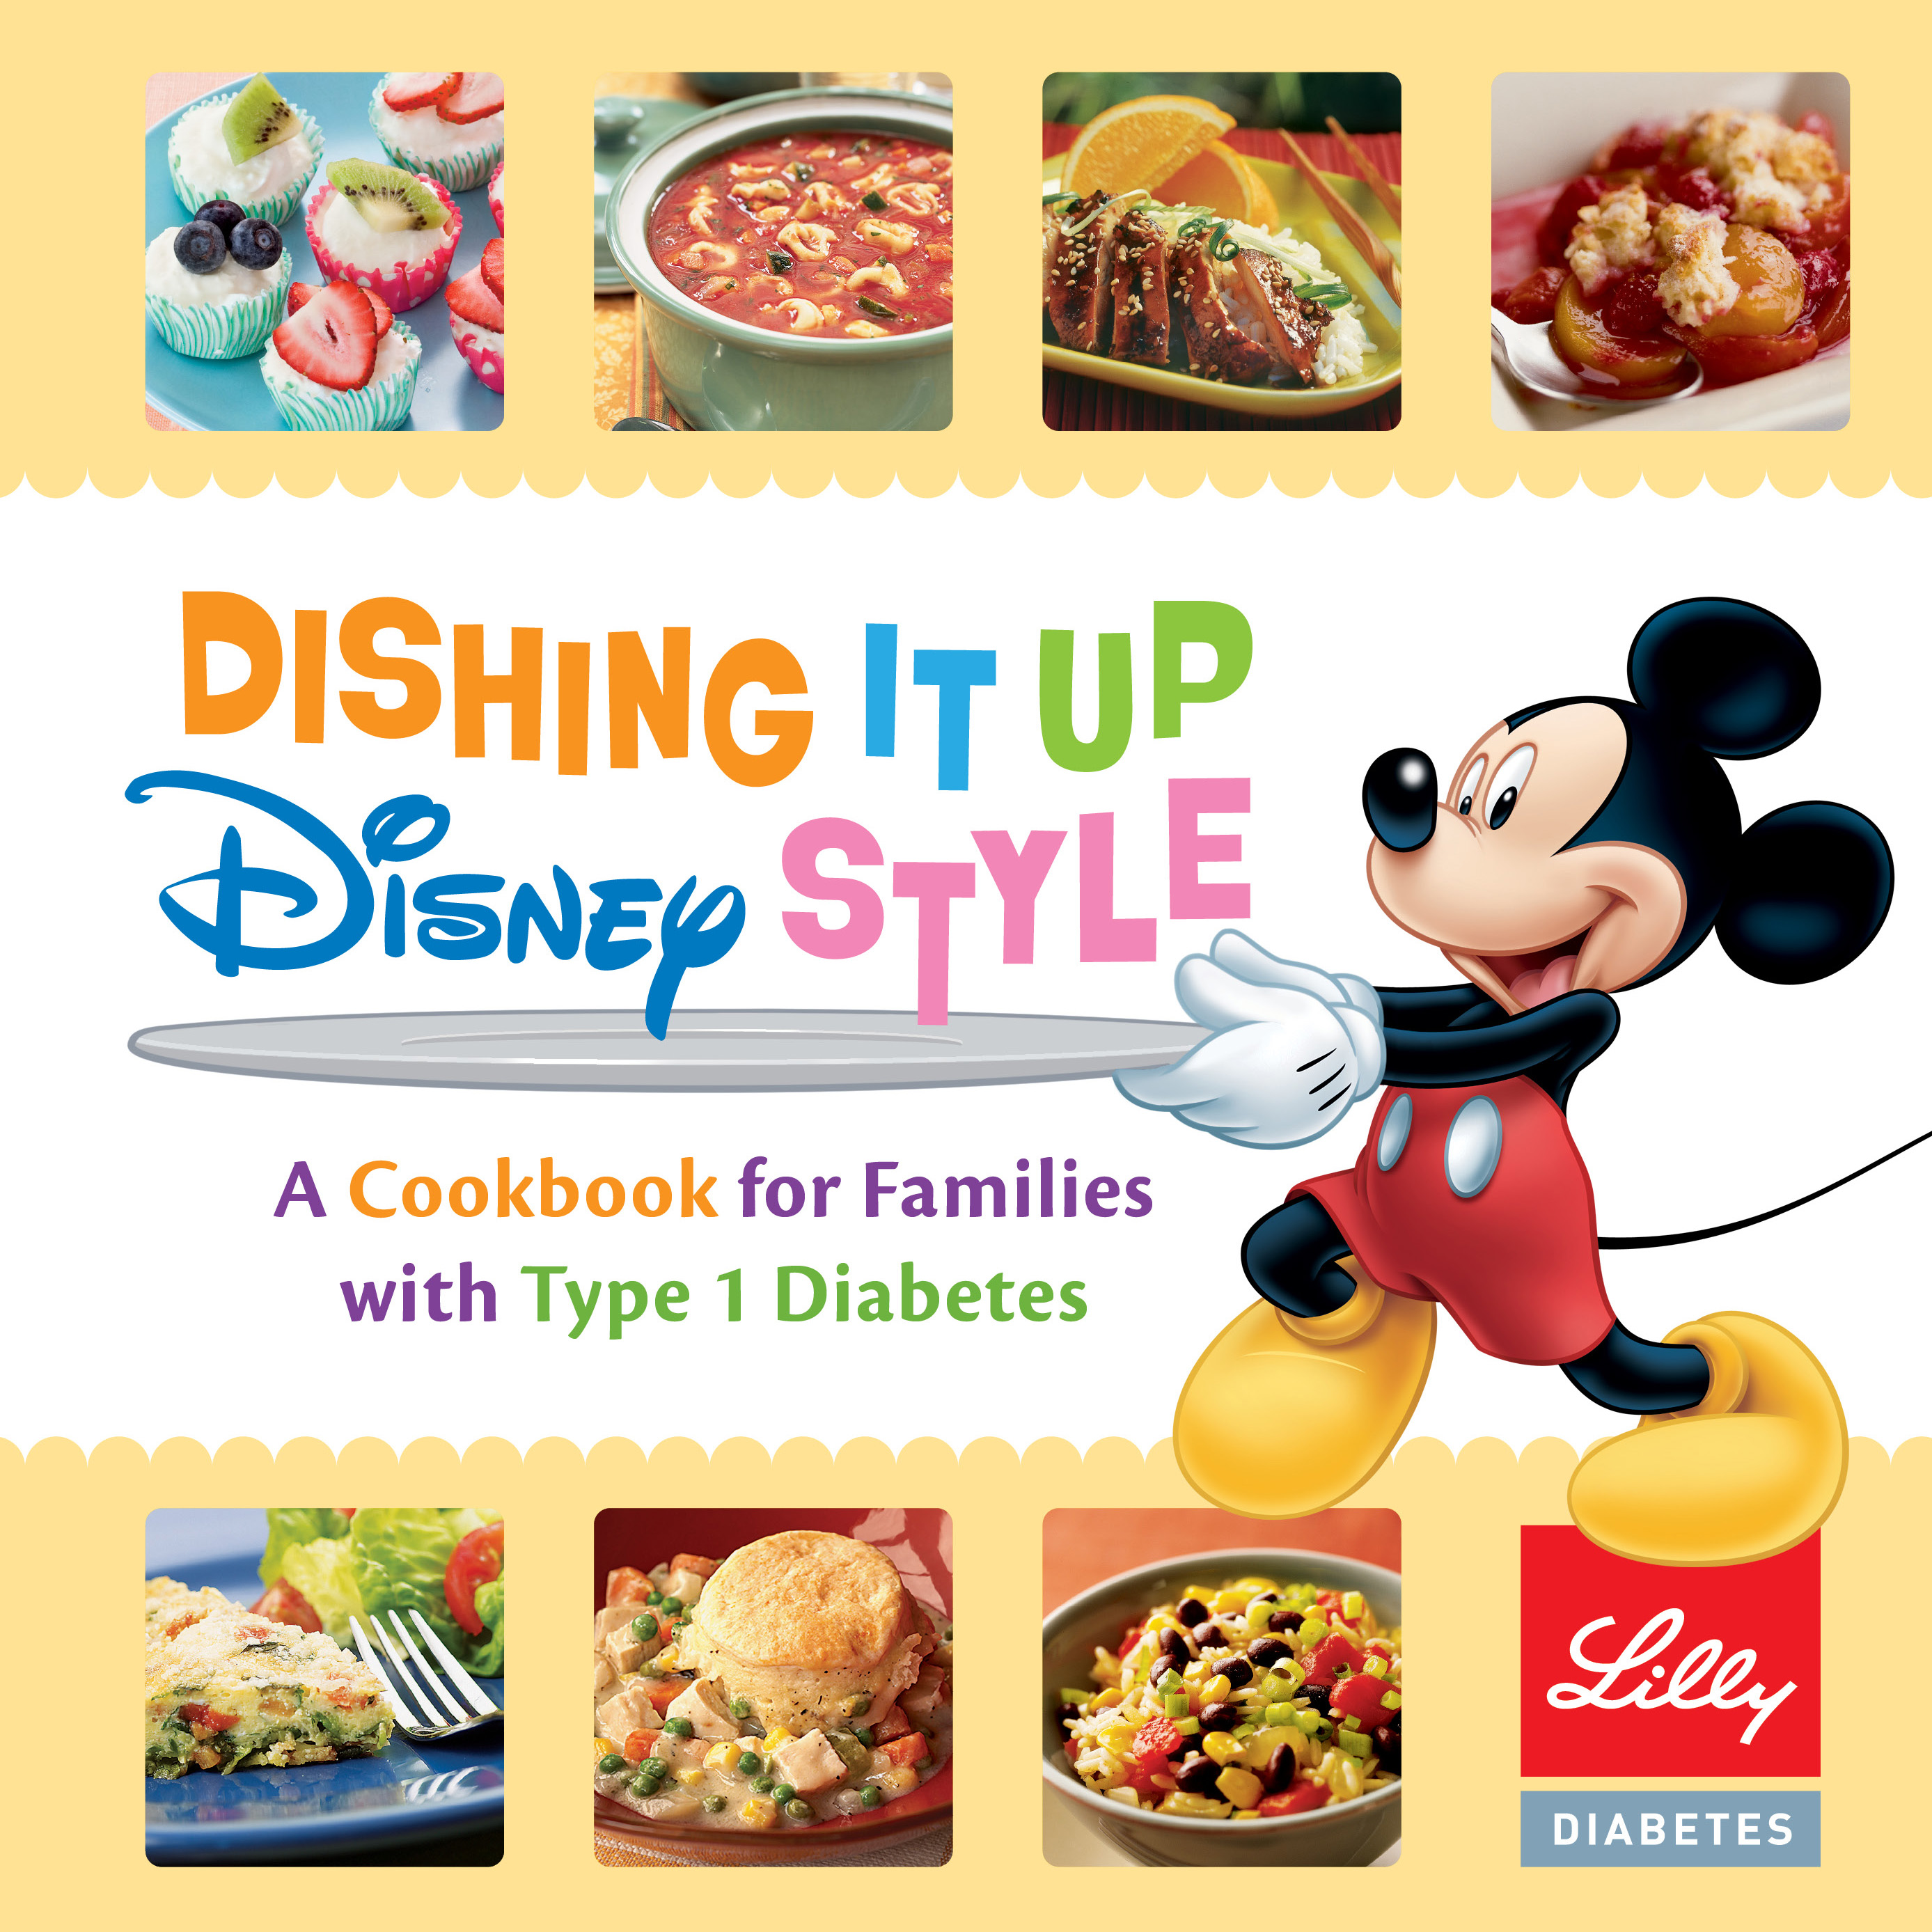 Dishing it up Disney style : a cookbook for families with type 1 diabetes